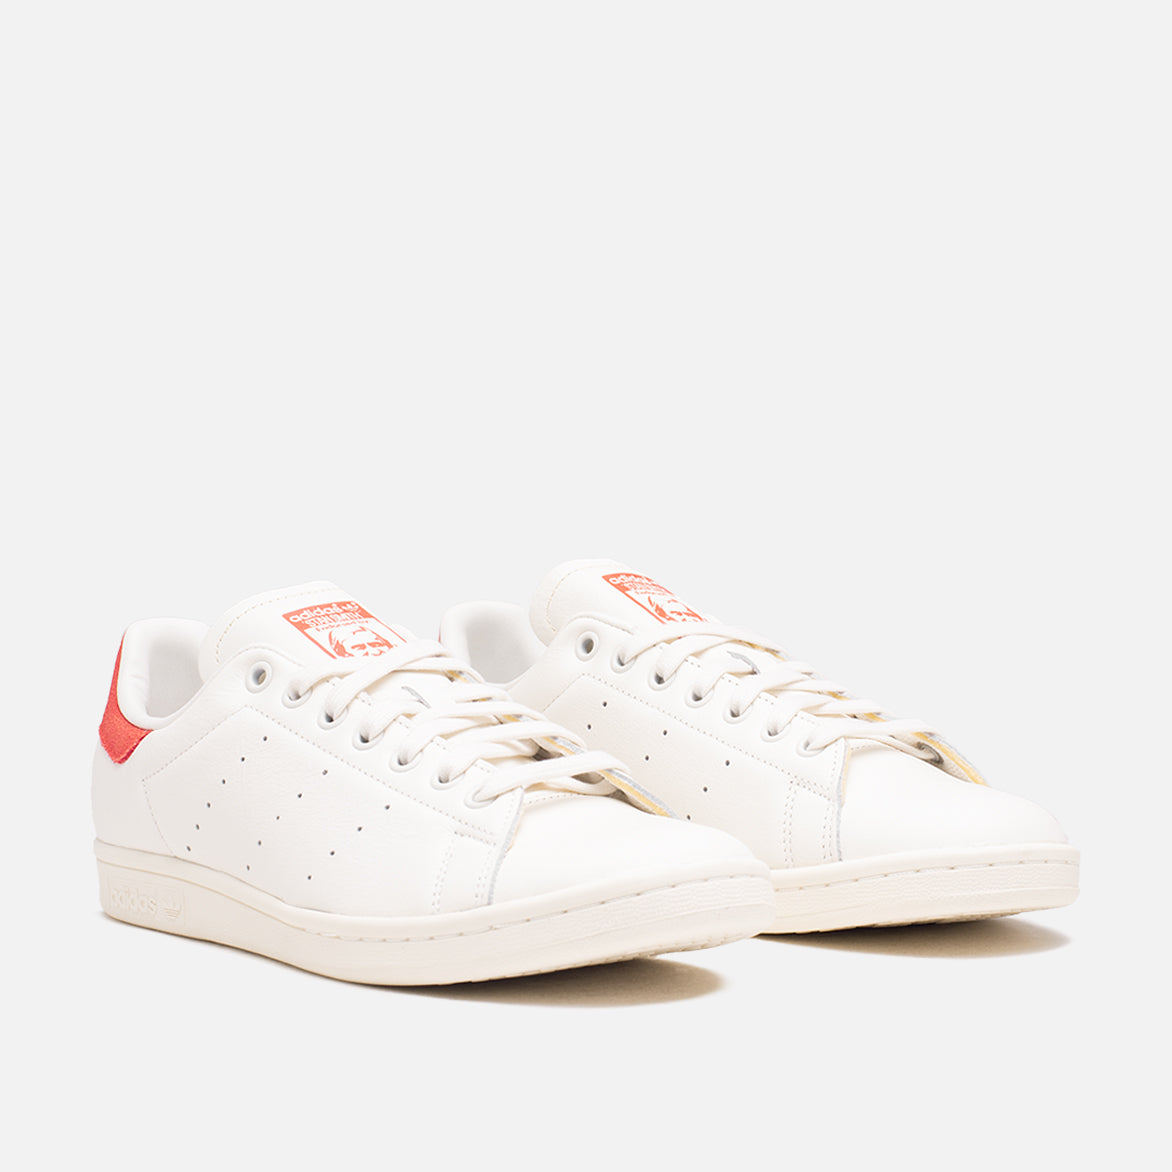 Adidas Stan Smith Shoes - Men's - White / Off White / Preloved Red - 8